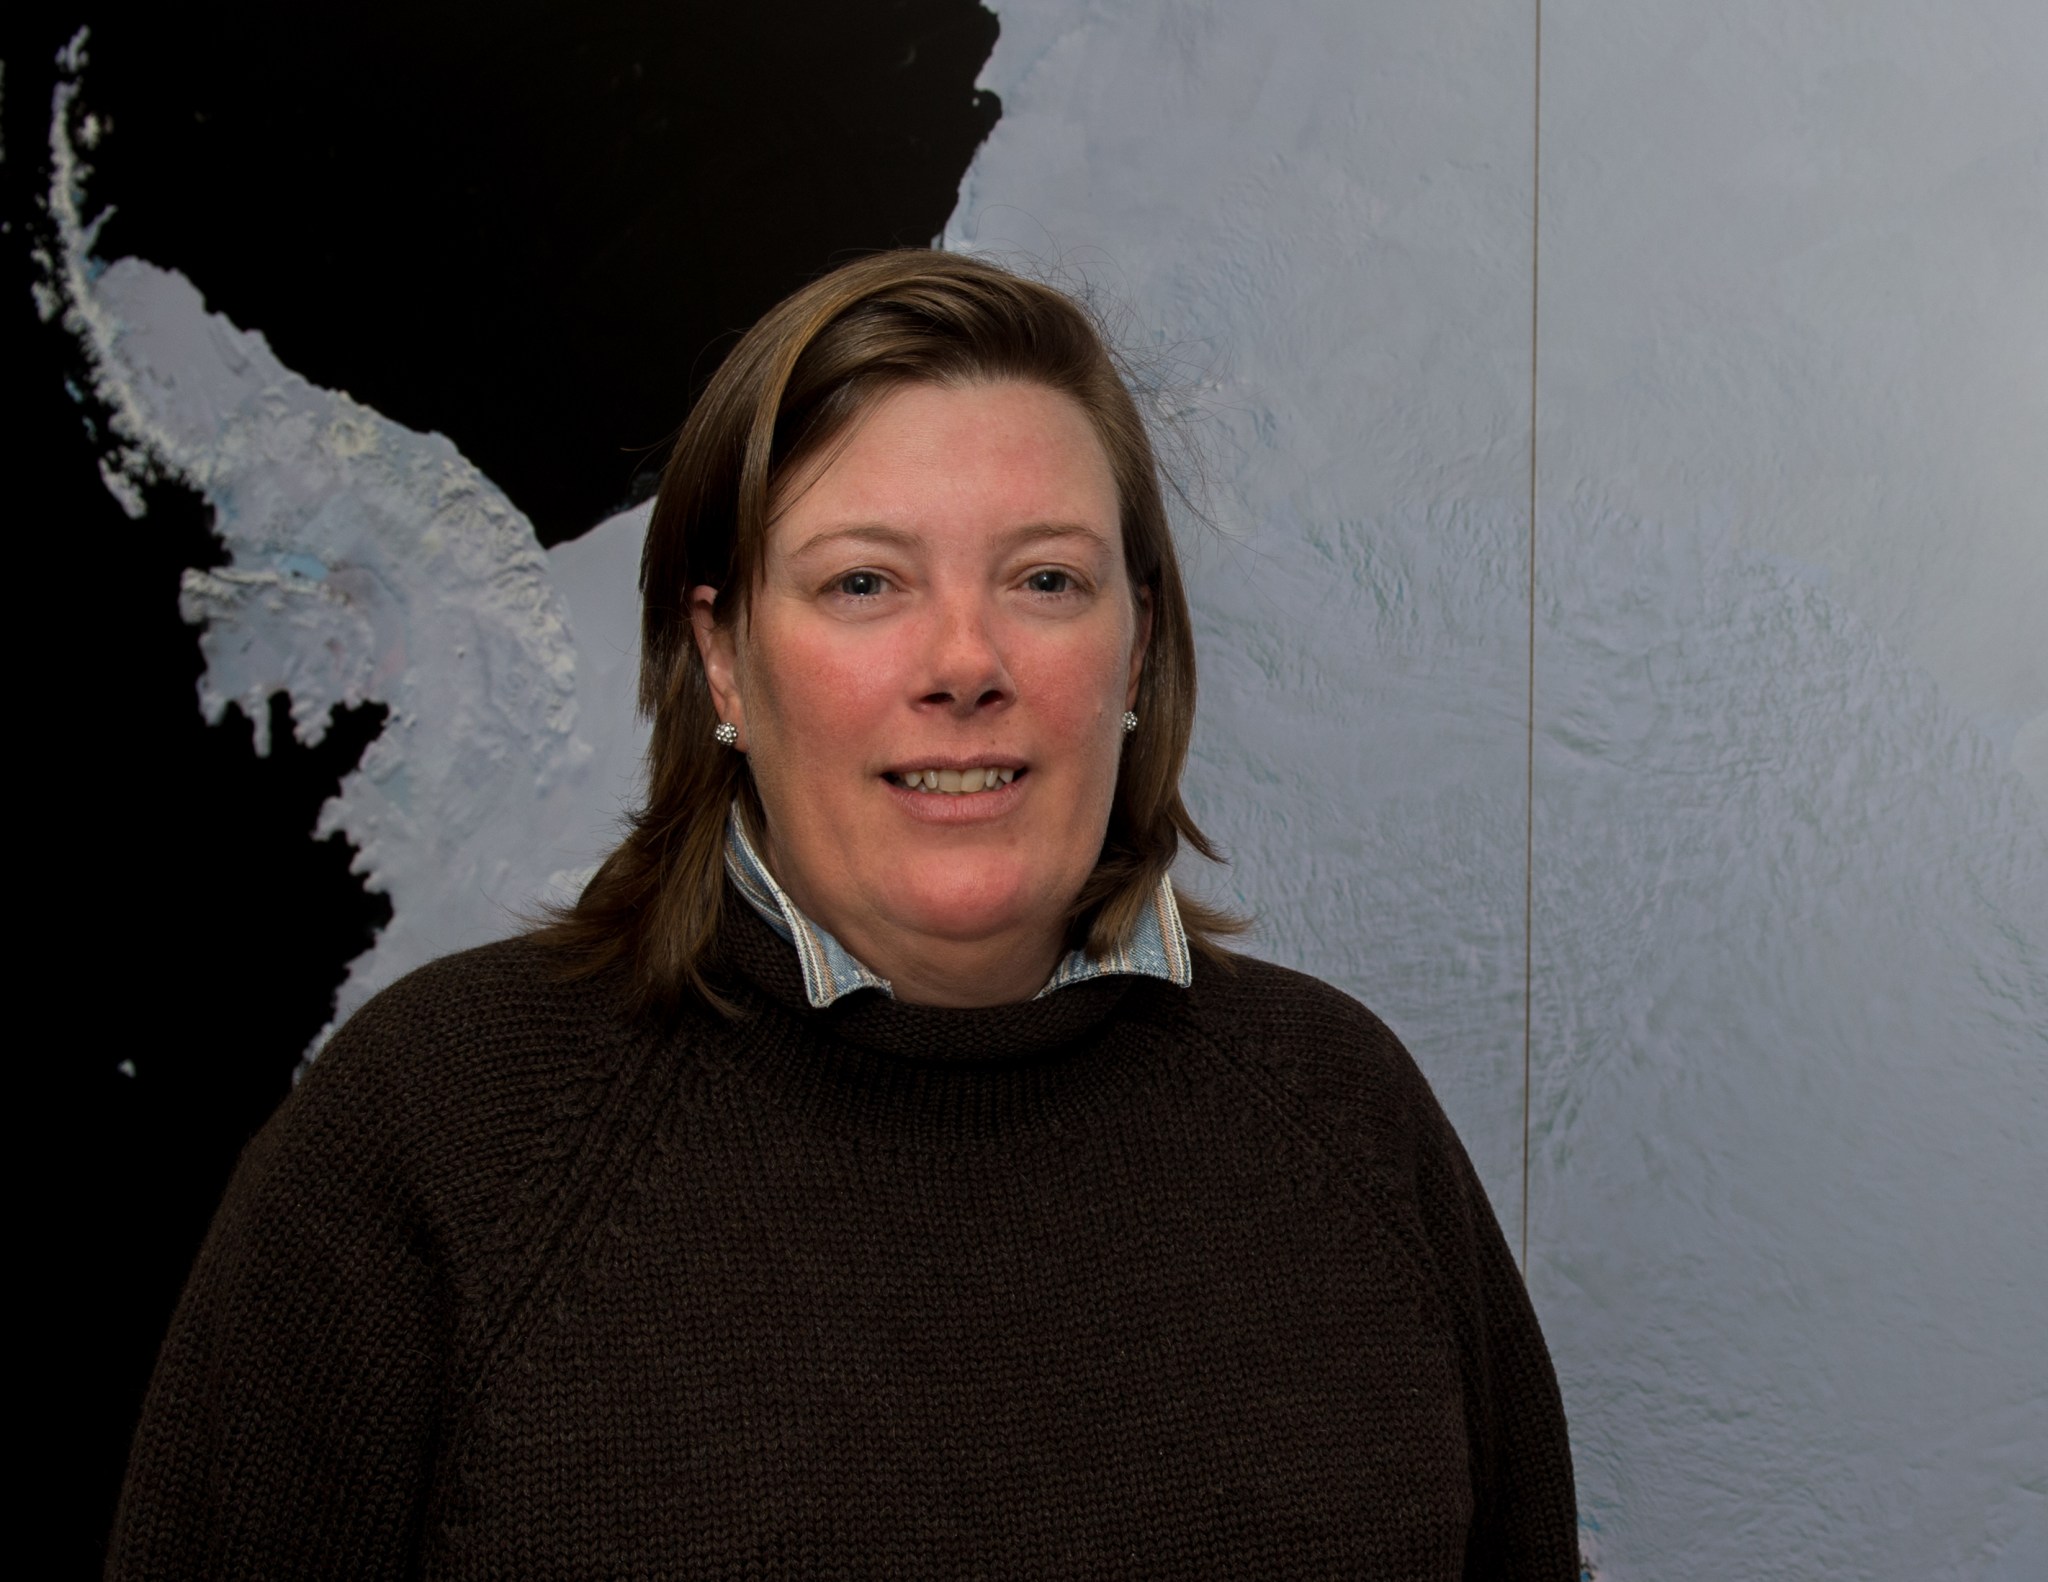 Woman with short brown hair wears a brown sweater with a collared shirt underneath. She stands in front of a map of ice.